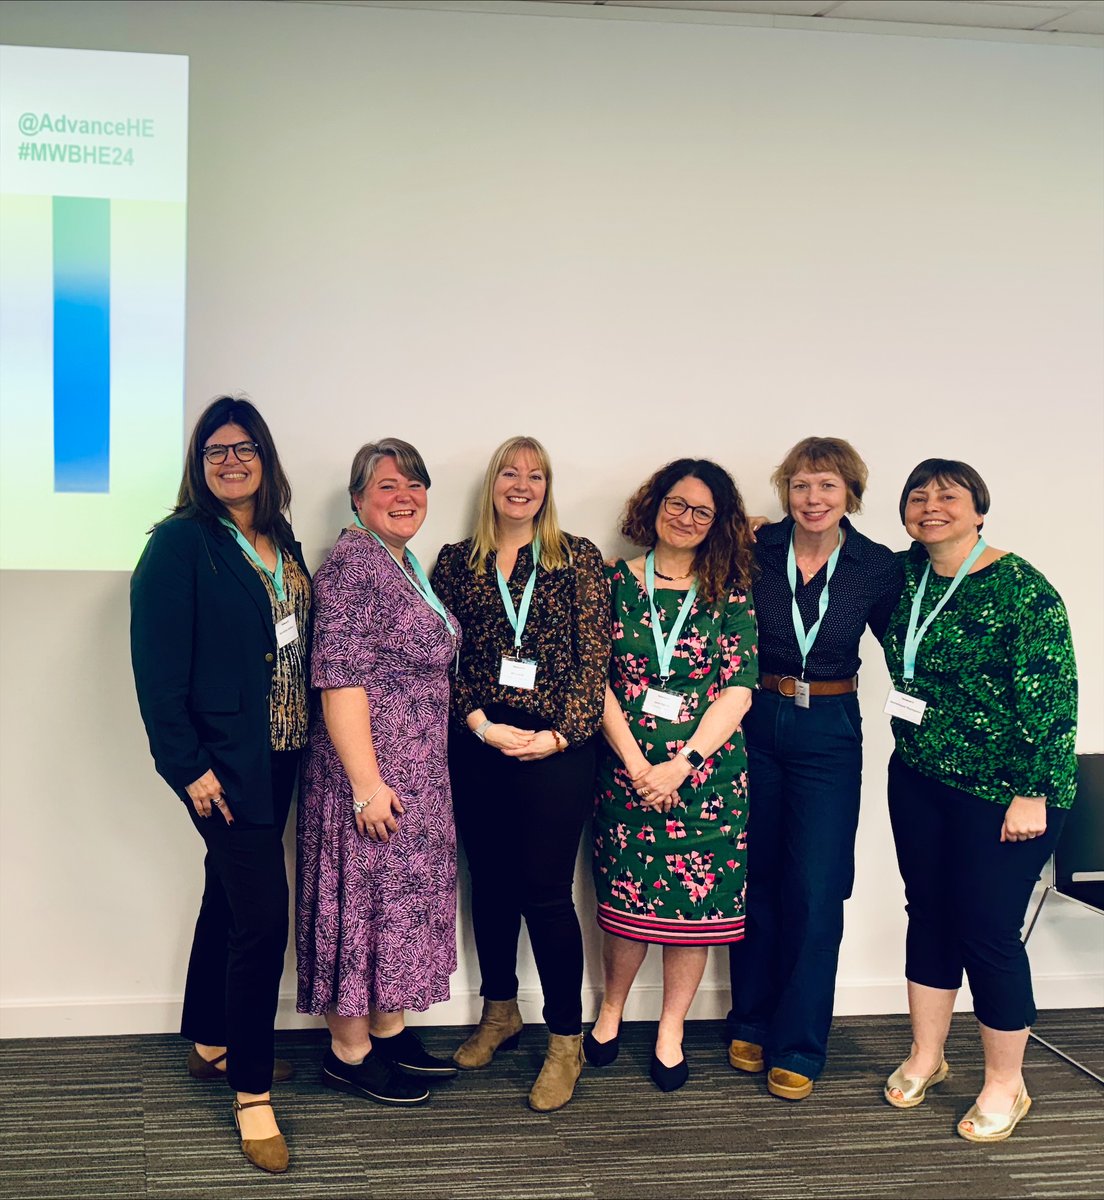 Our Founder & CEO, Dr Anna Matthews chaired an event at the Mental Wellbeing in HE Conference 2024 last week. We are proud to be part of an important movement to improve mental health outcomes. 

#MWBHE24 

@UMHANUK @StudentMindsOrg  @taso_he  @AdvanceHE @CharlieWallerUK